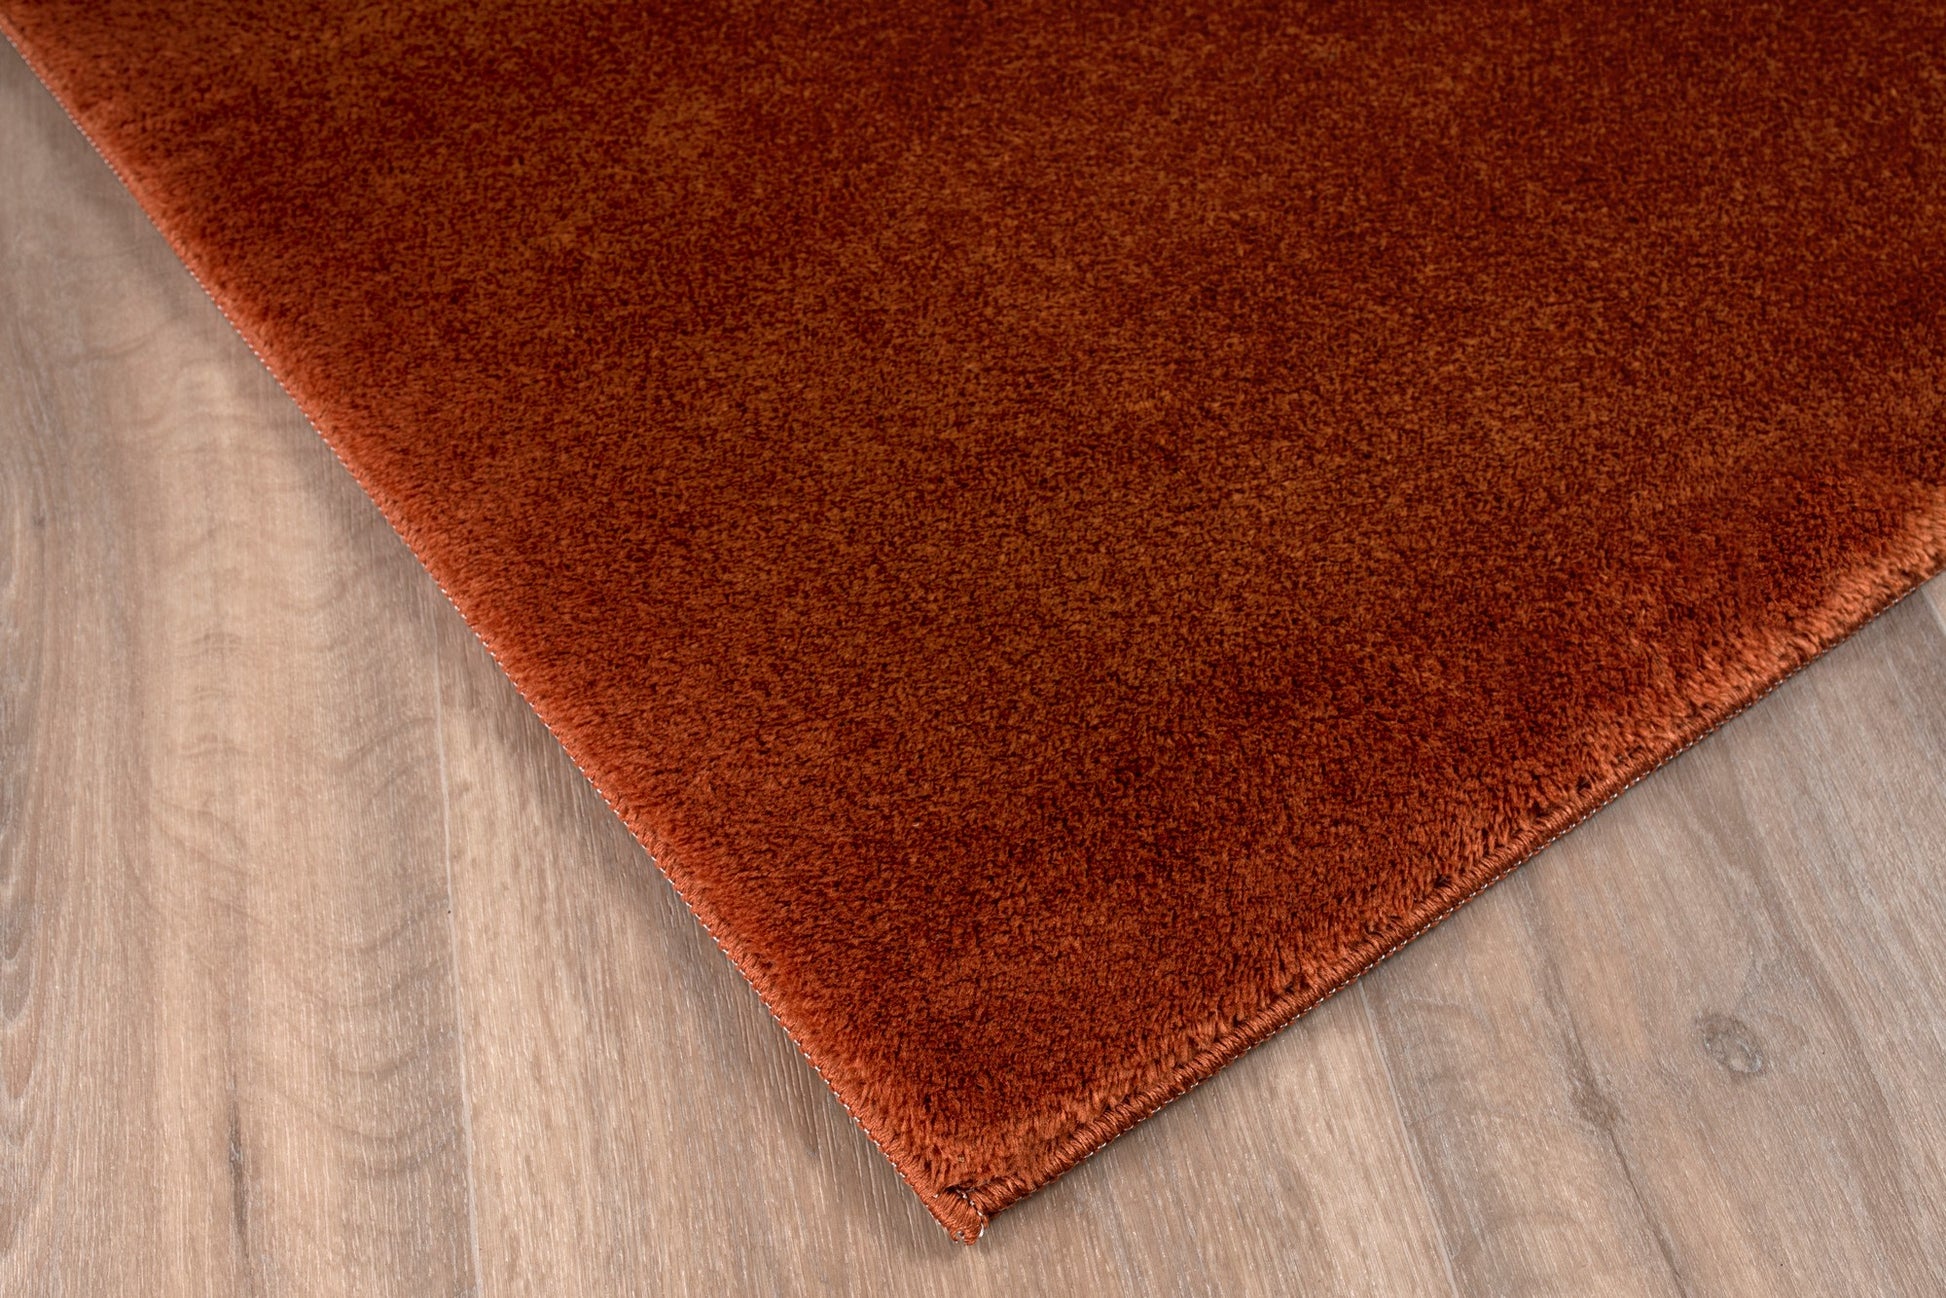 copper mustard fluffy soft machine washable area rug for living room bedroom 4x6, 4x5 ft Small Carpet, Home Office, Living Room, Bedroom